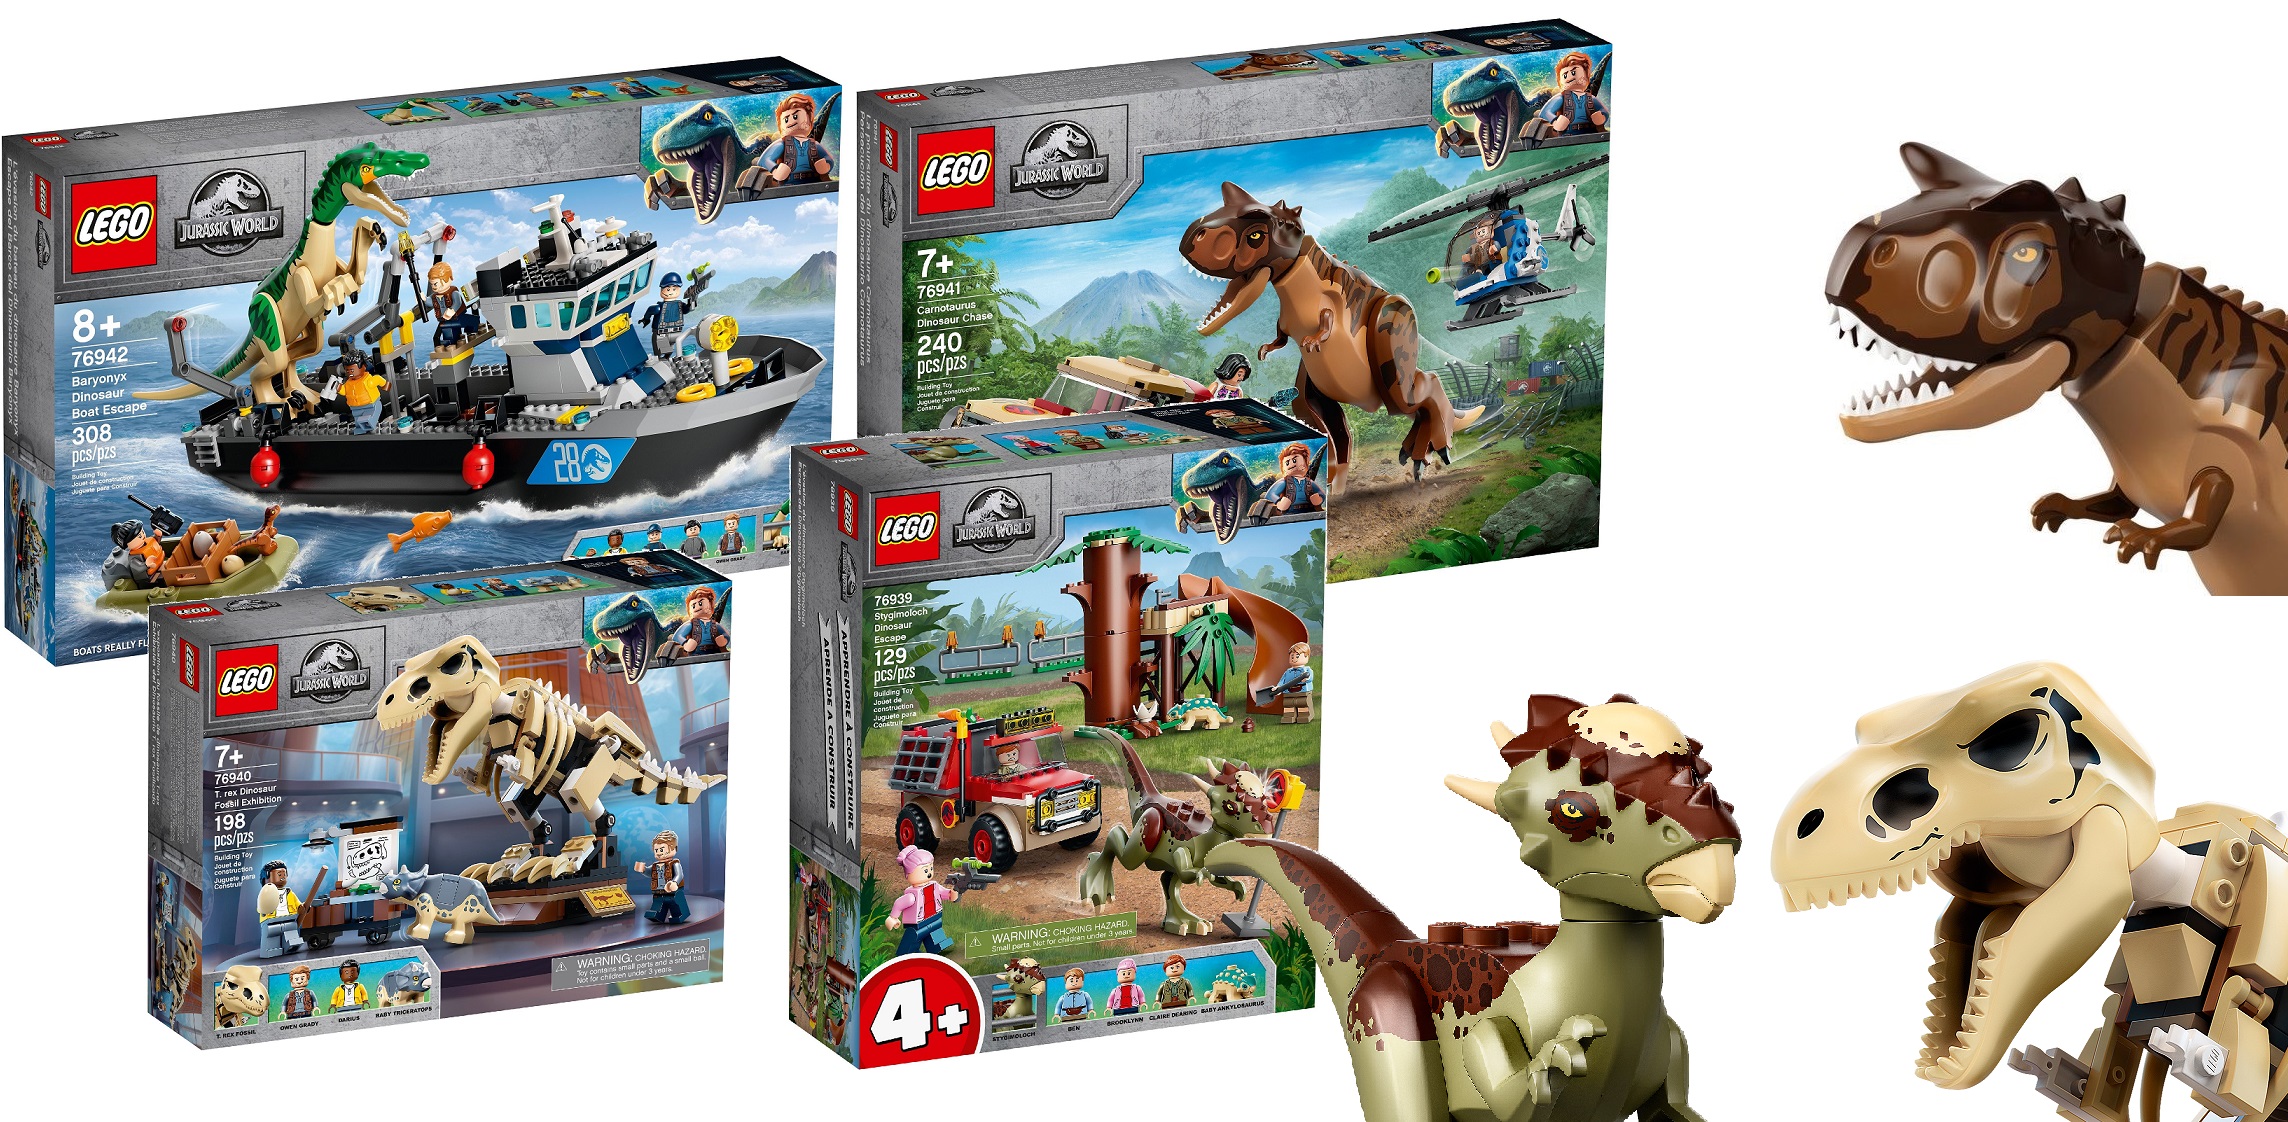 First Look: New 2021 LEGO World Camp Cretaceous sets - Jay's Brick Blog